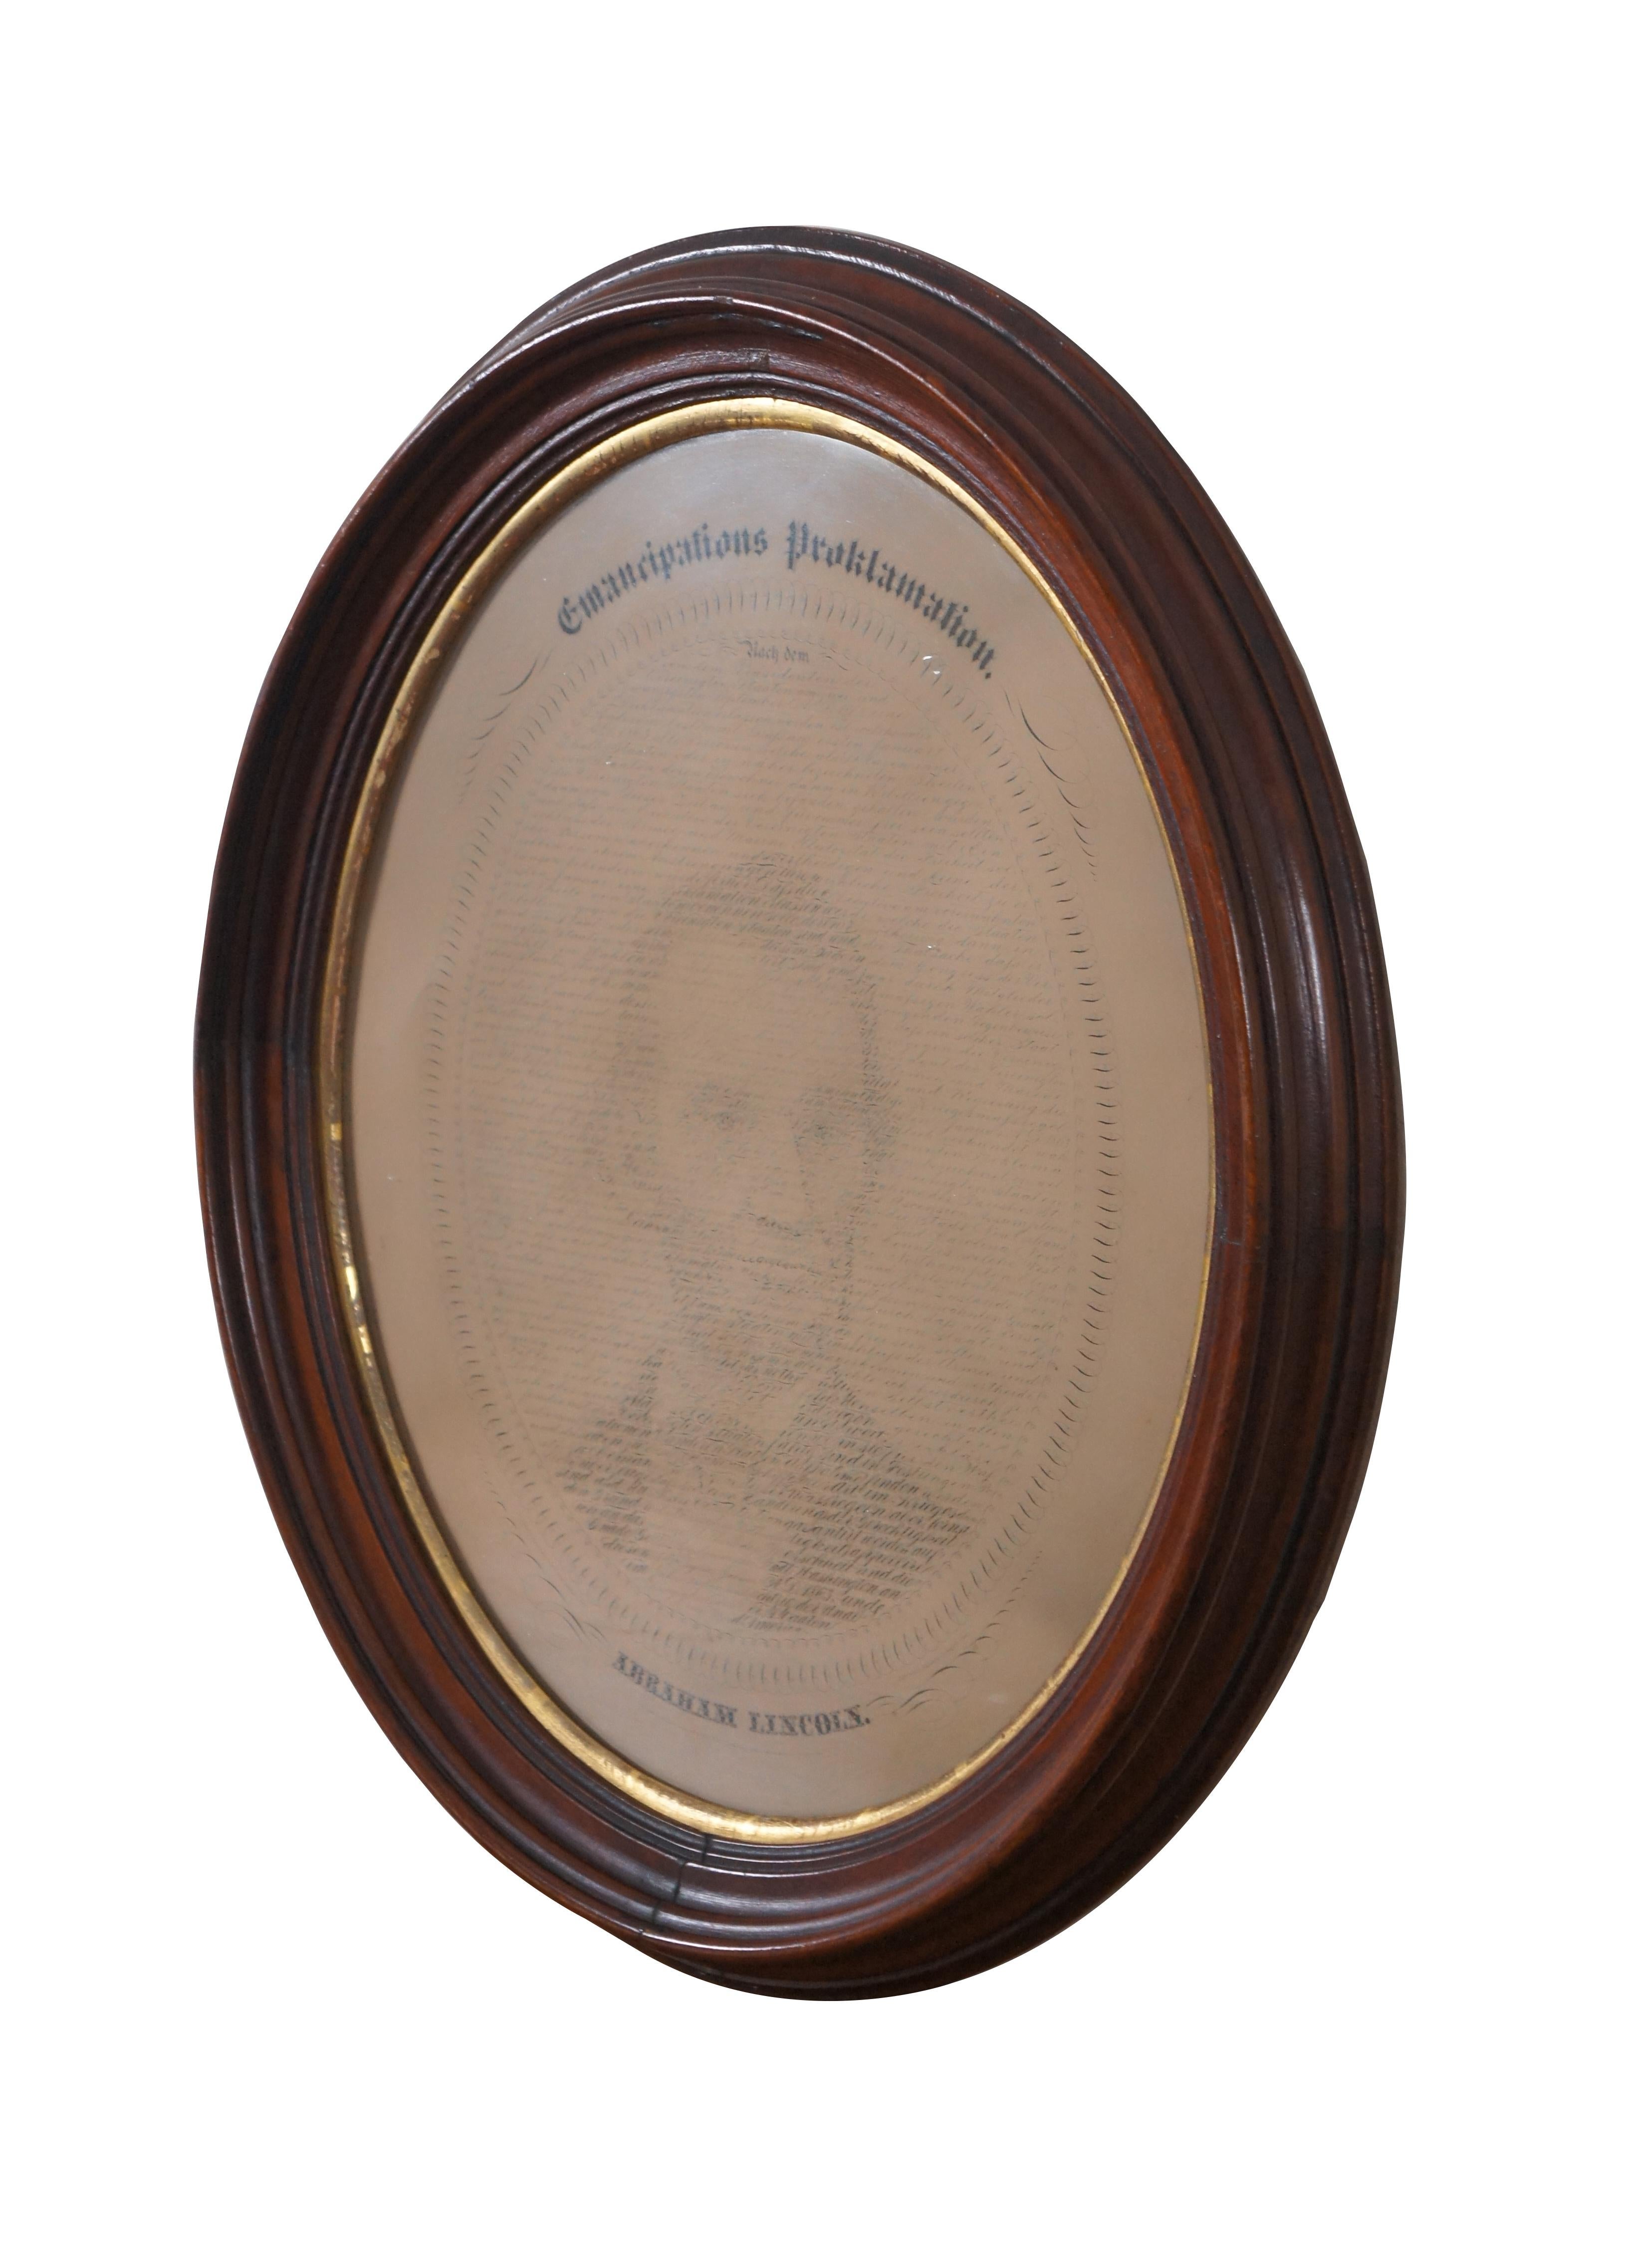 Antique 1865 German language version of W.H. Pratt’s calligraphic portrait of U.S. President Abraham Lincoln within the text of the 1863 Emancipation Proclamation. Drawn and Written by W.H. Pratt, Davenport, Iowa. Lithographed by A. Hugebock,